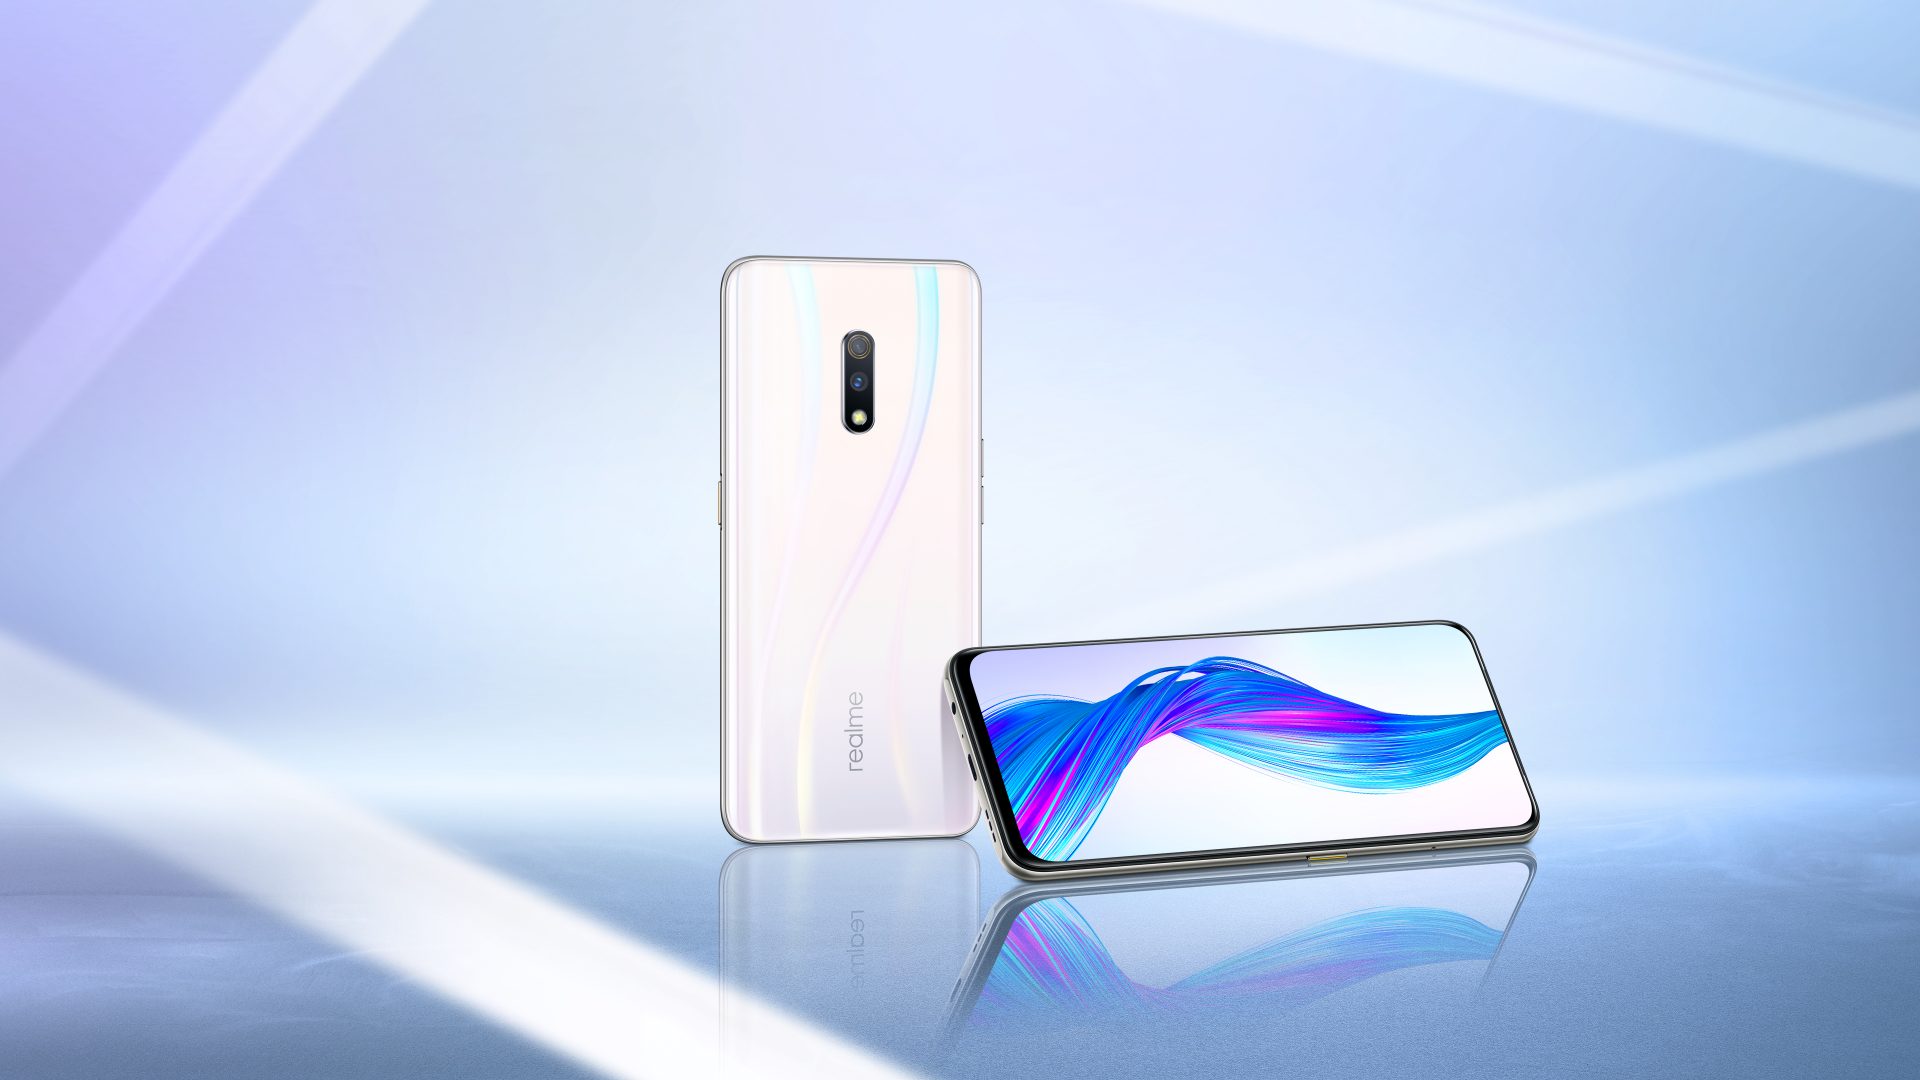 Realme X with Snapdragon 710 launched in India at Rs 16,999